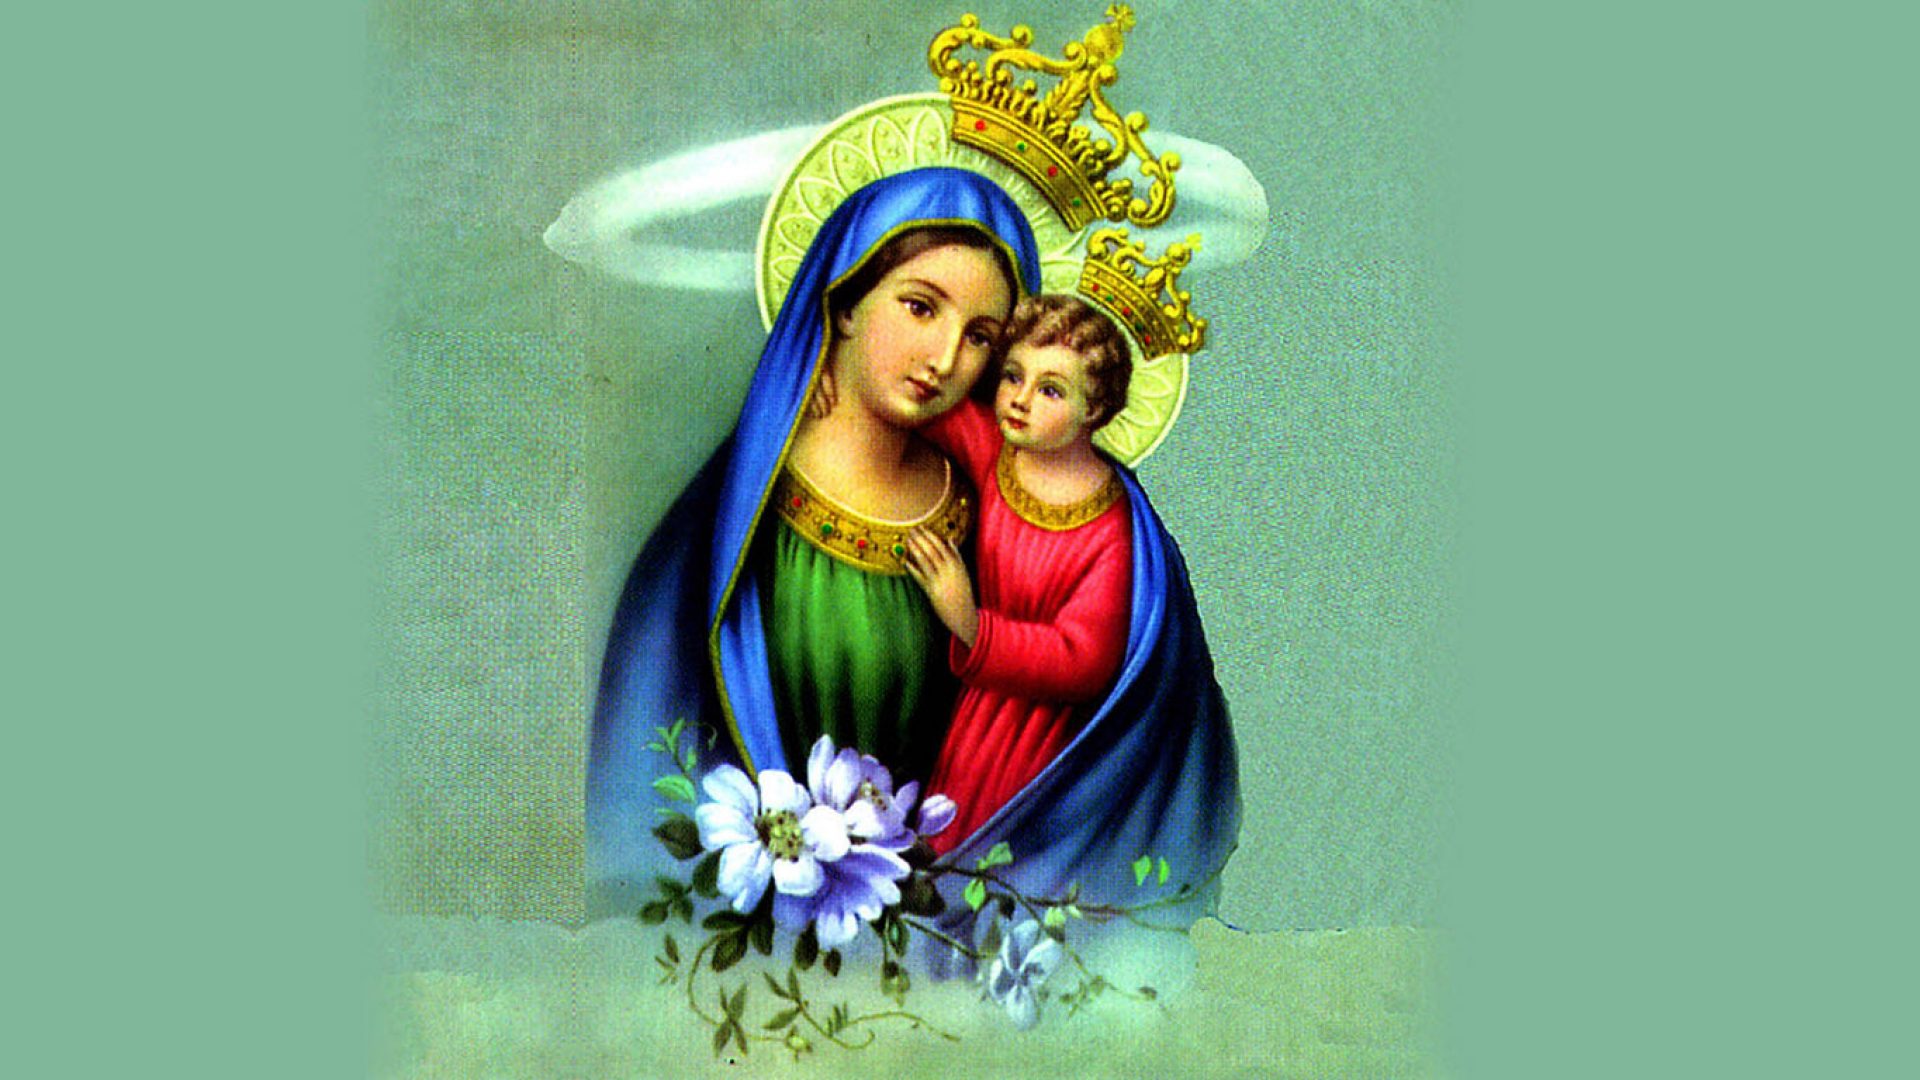 Mother Mary With Baby Jesus Hd Wallpaper Free Download - God HD Wallpapers